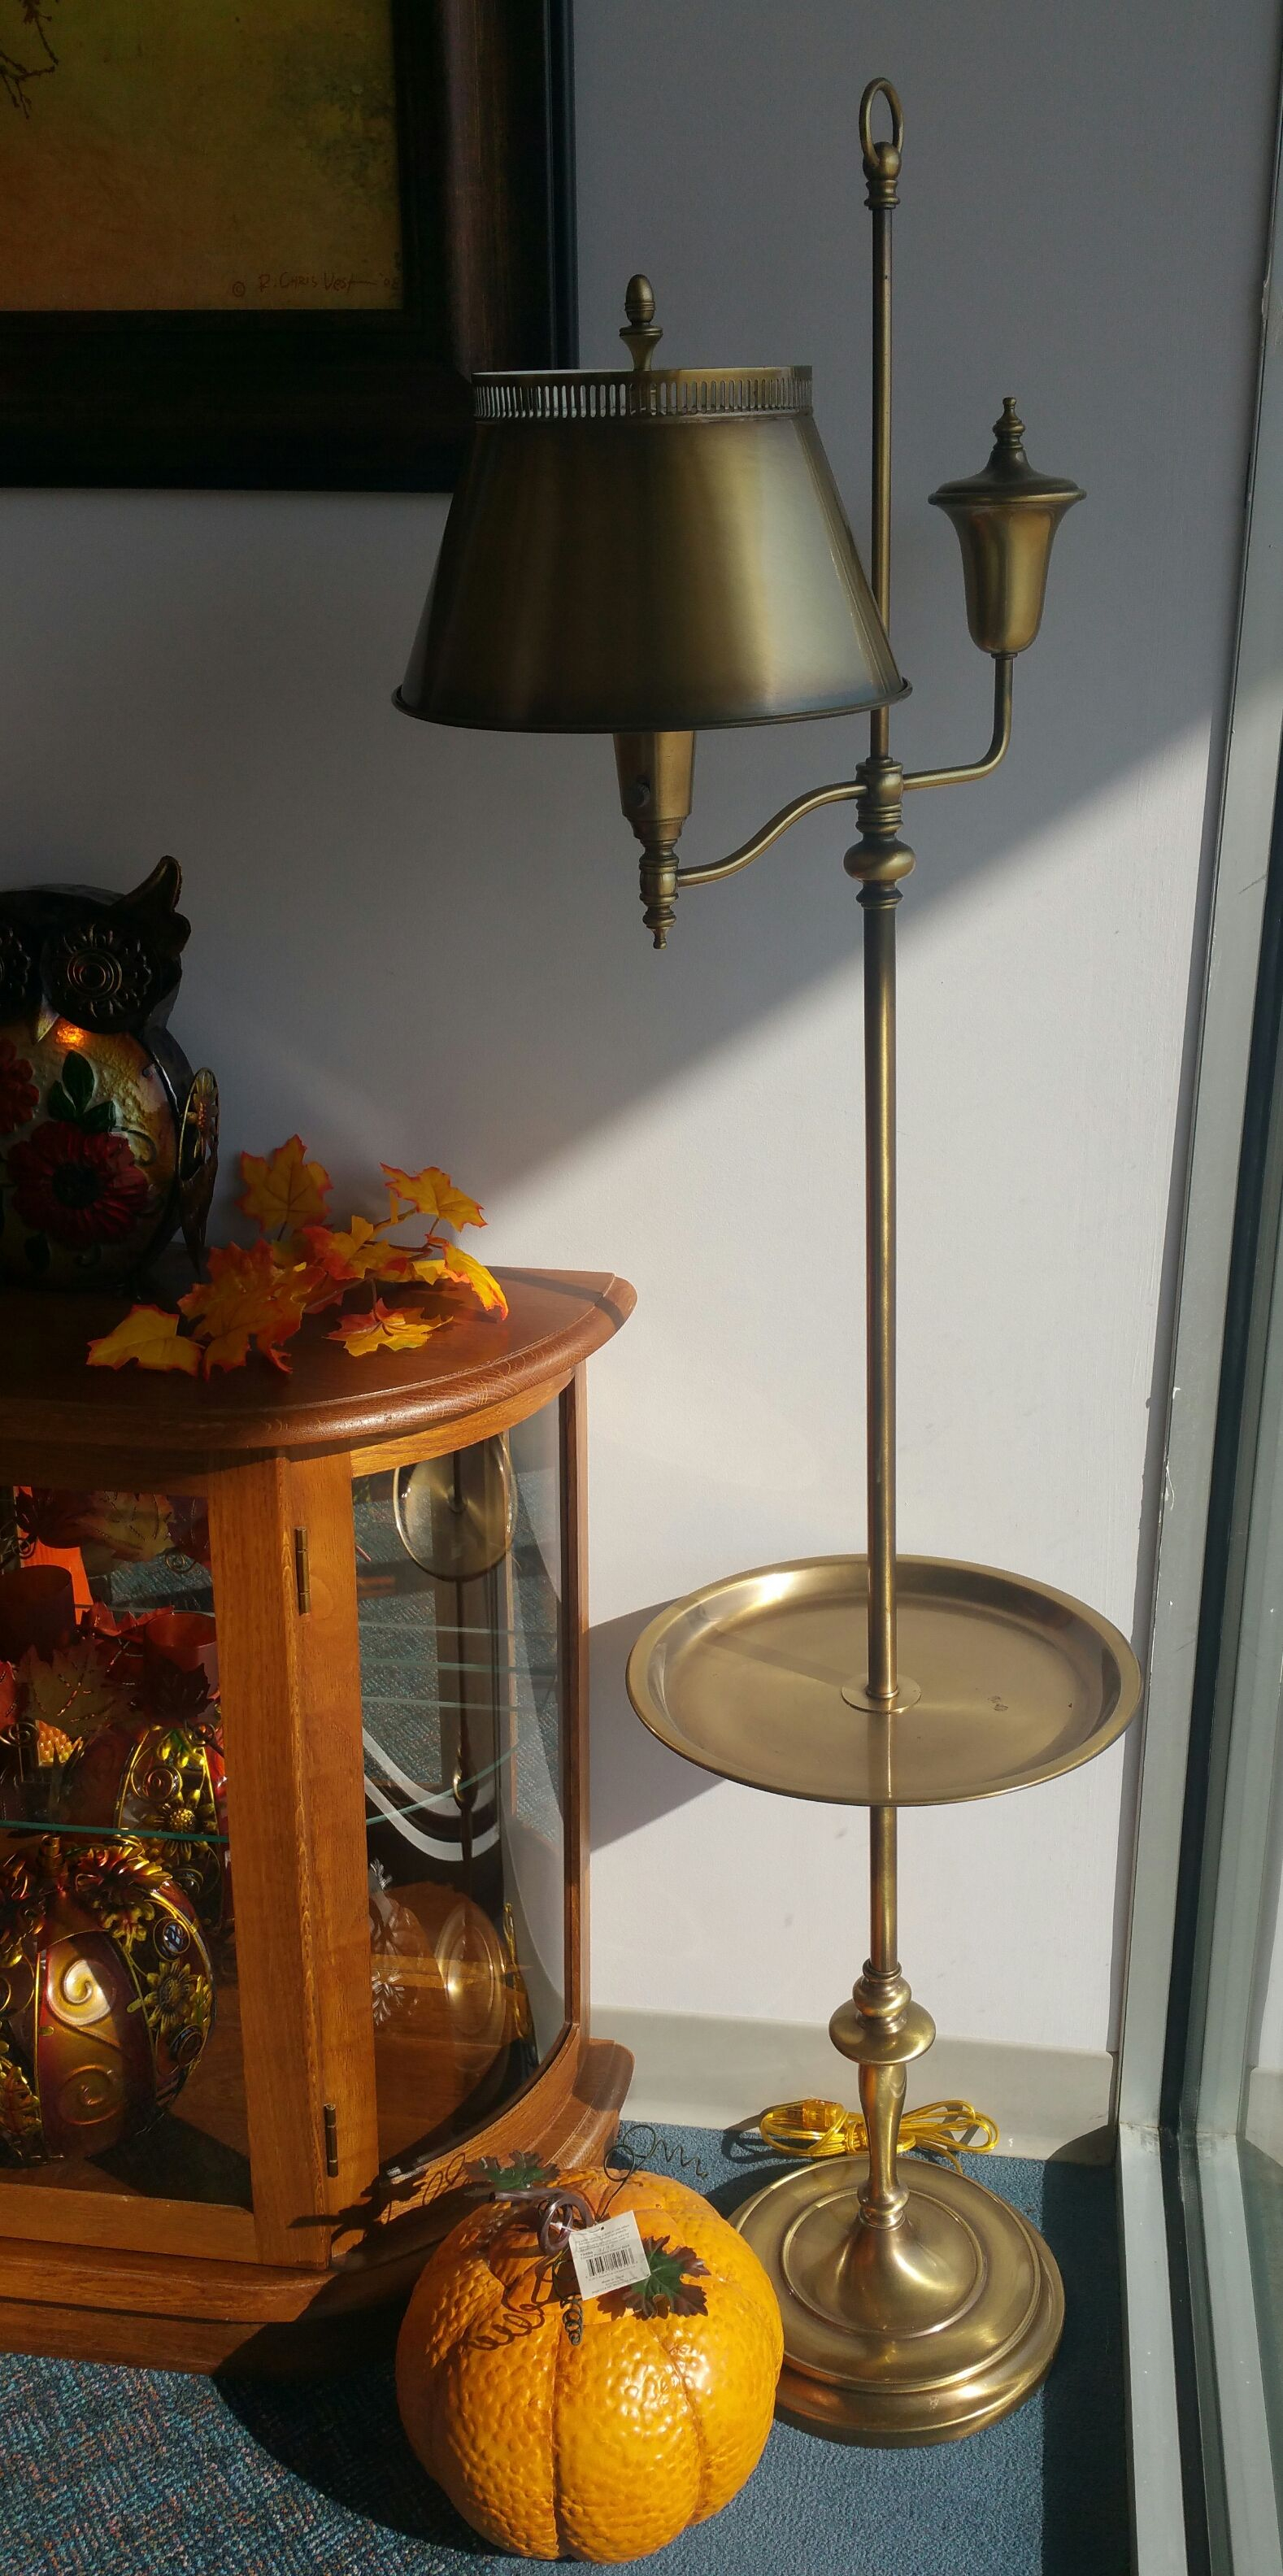 Antique Brass Tole Floor Lamp With Attached Tray Still Has intended for dimensions 1578 X 3168